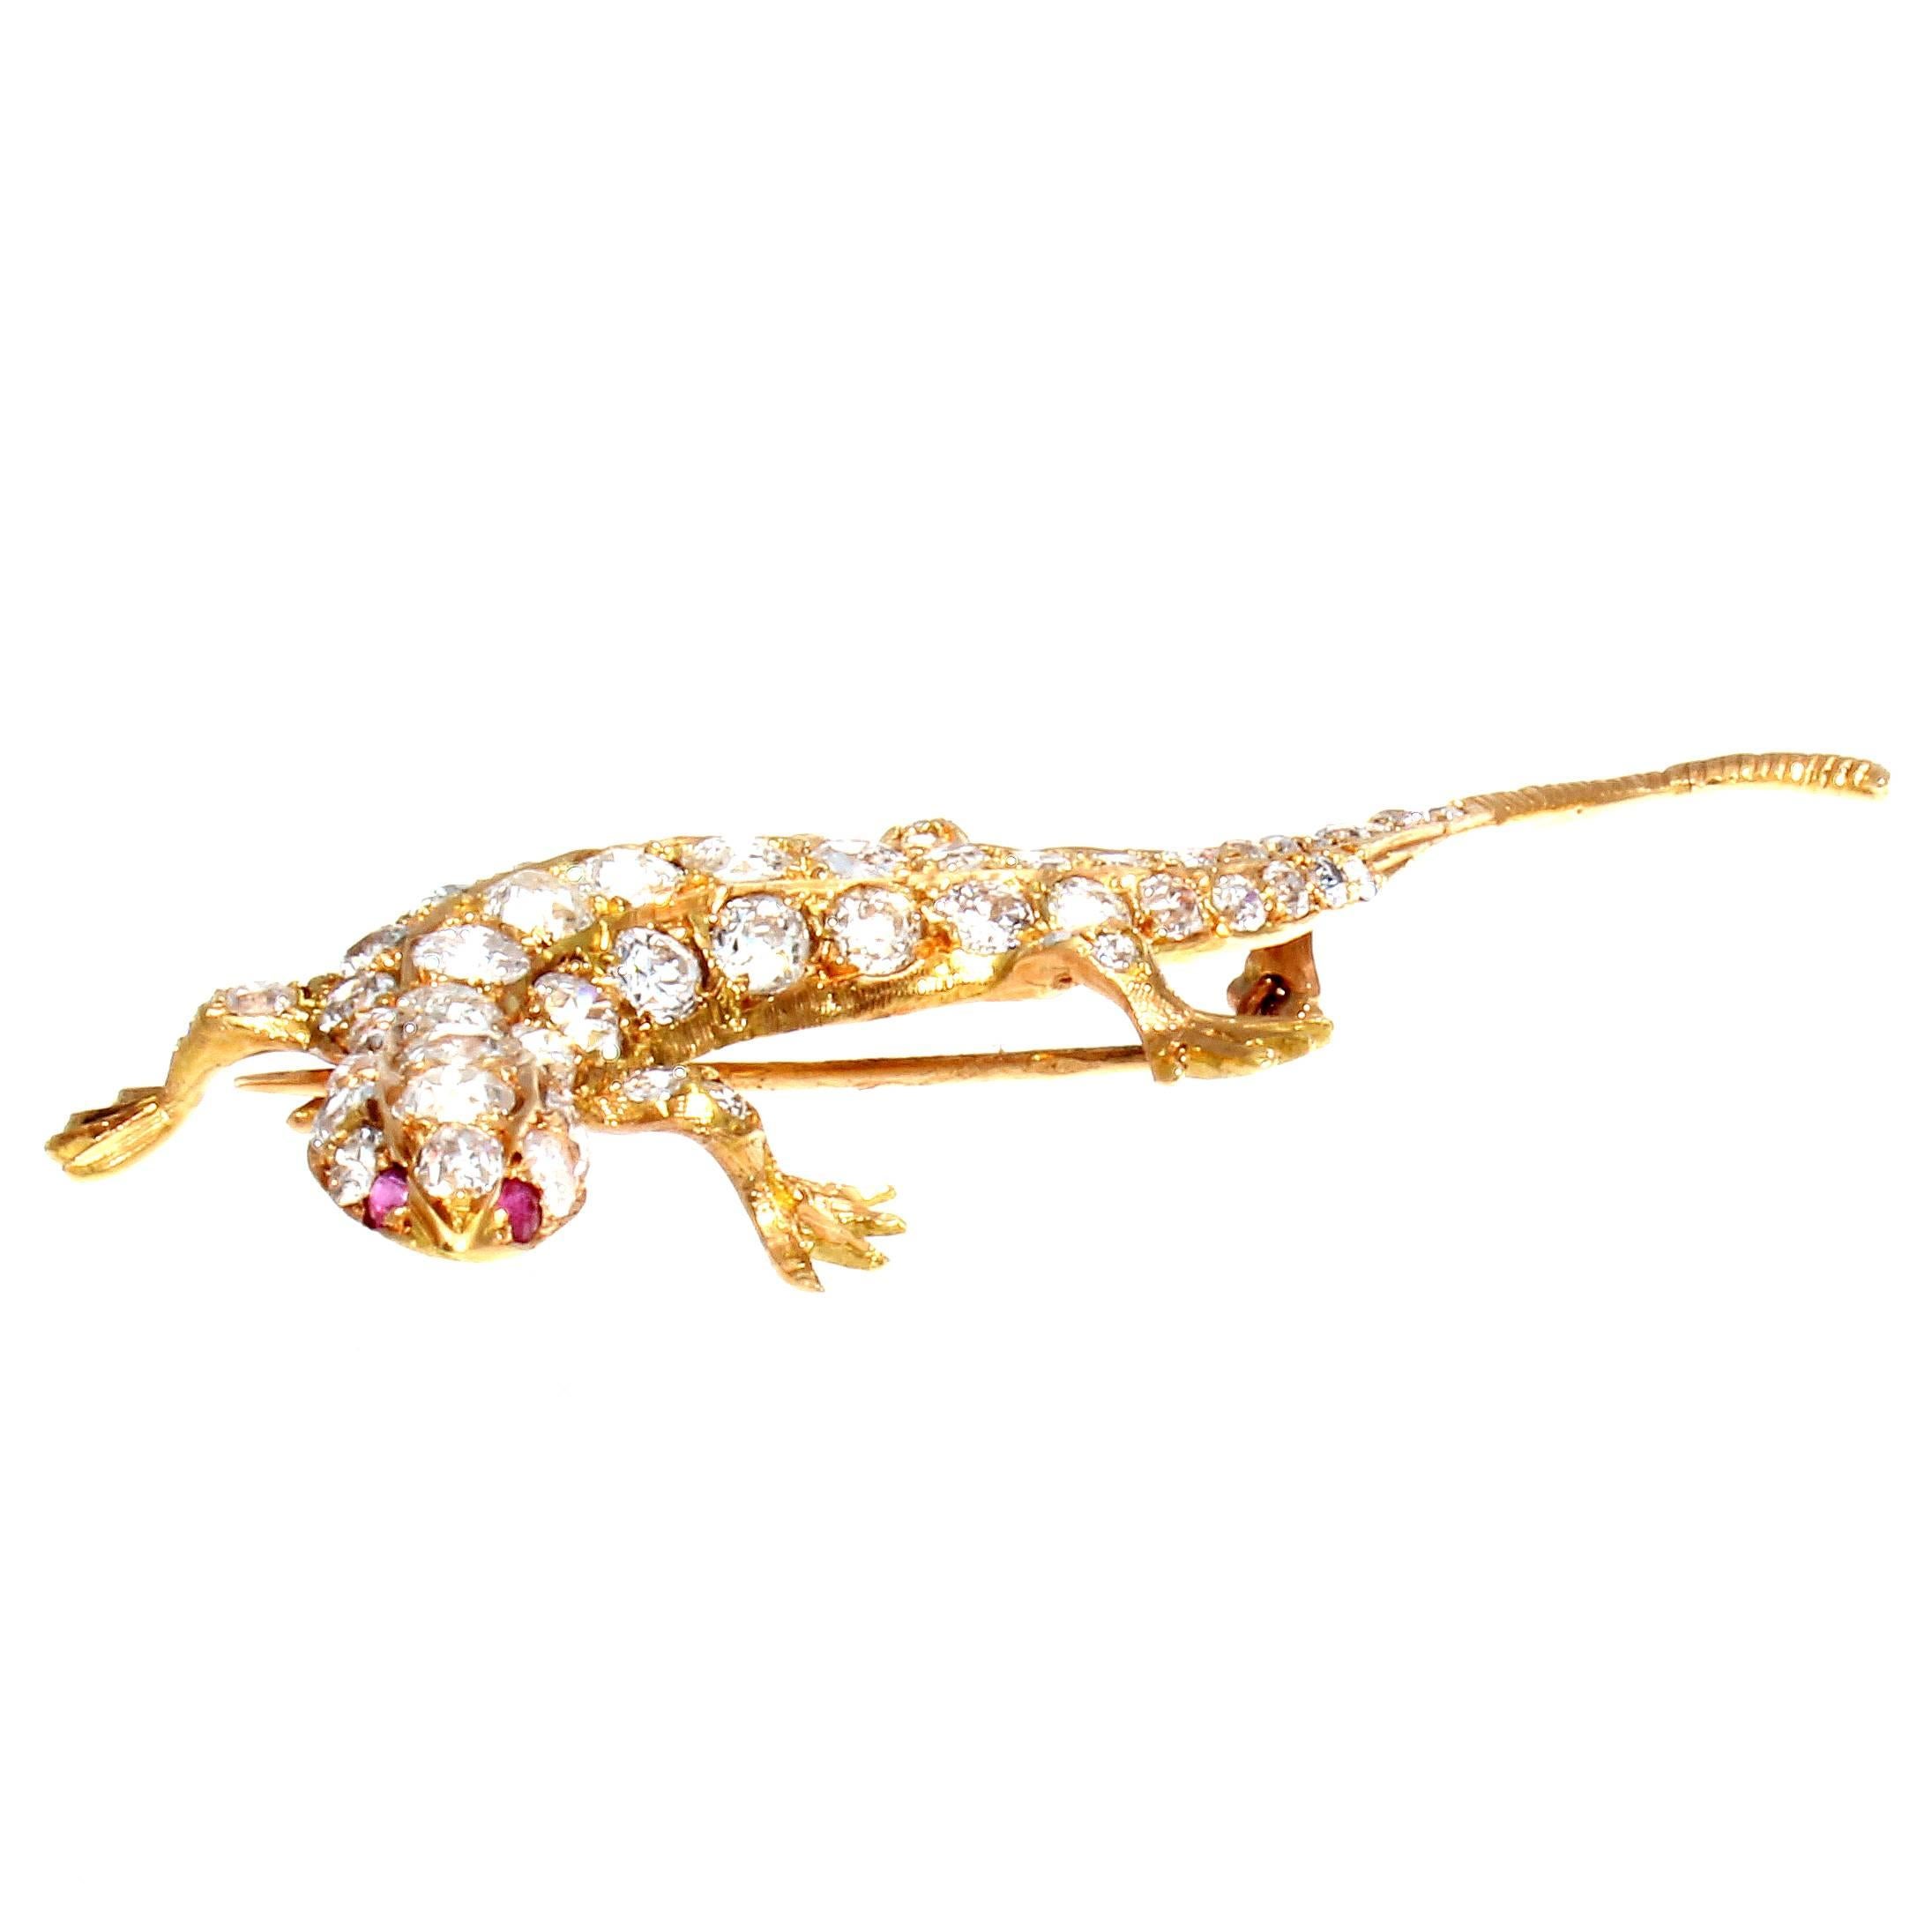 Sensuous and undulating the salamandre is the essence of primordial movement. Featuring 65 near colorless round brilliant cut diamonds weighing approximately 6 carats and two lively red rubies that have all been hand crafted in 18k yellow gold.